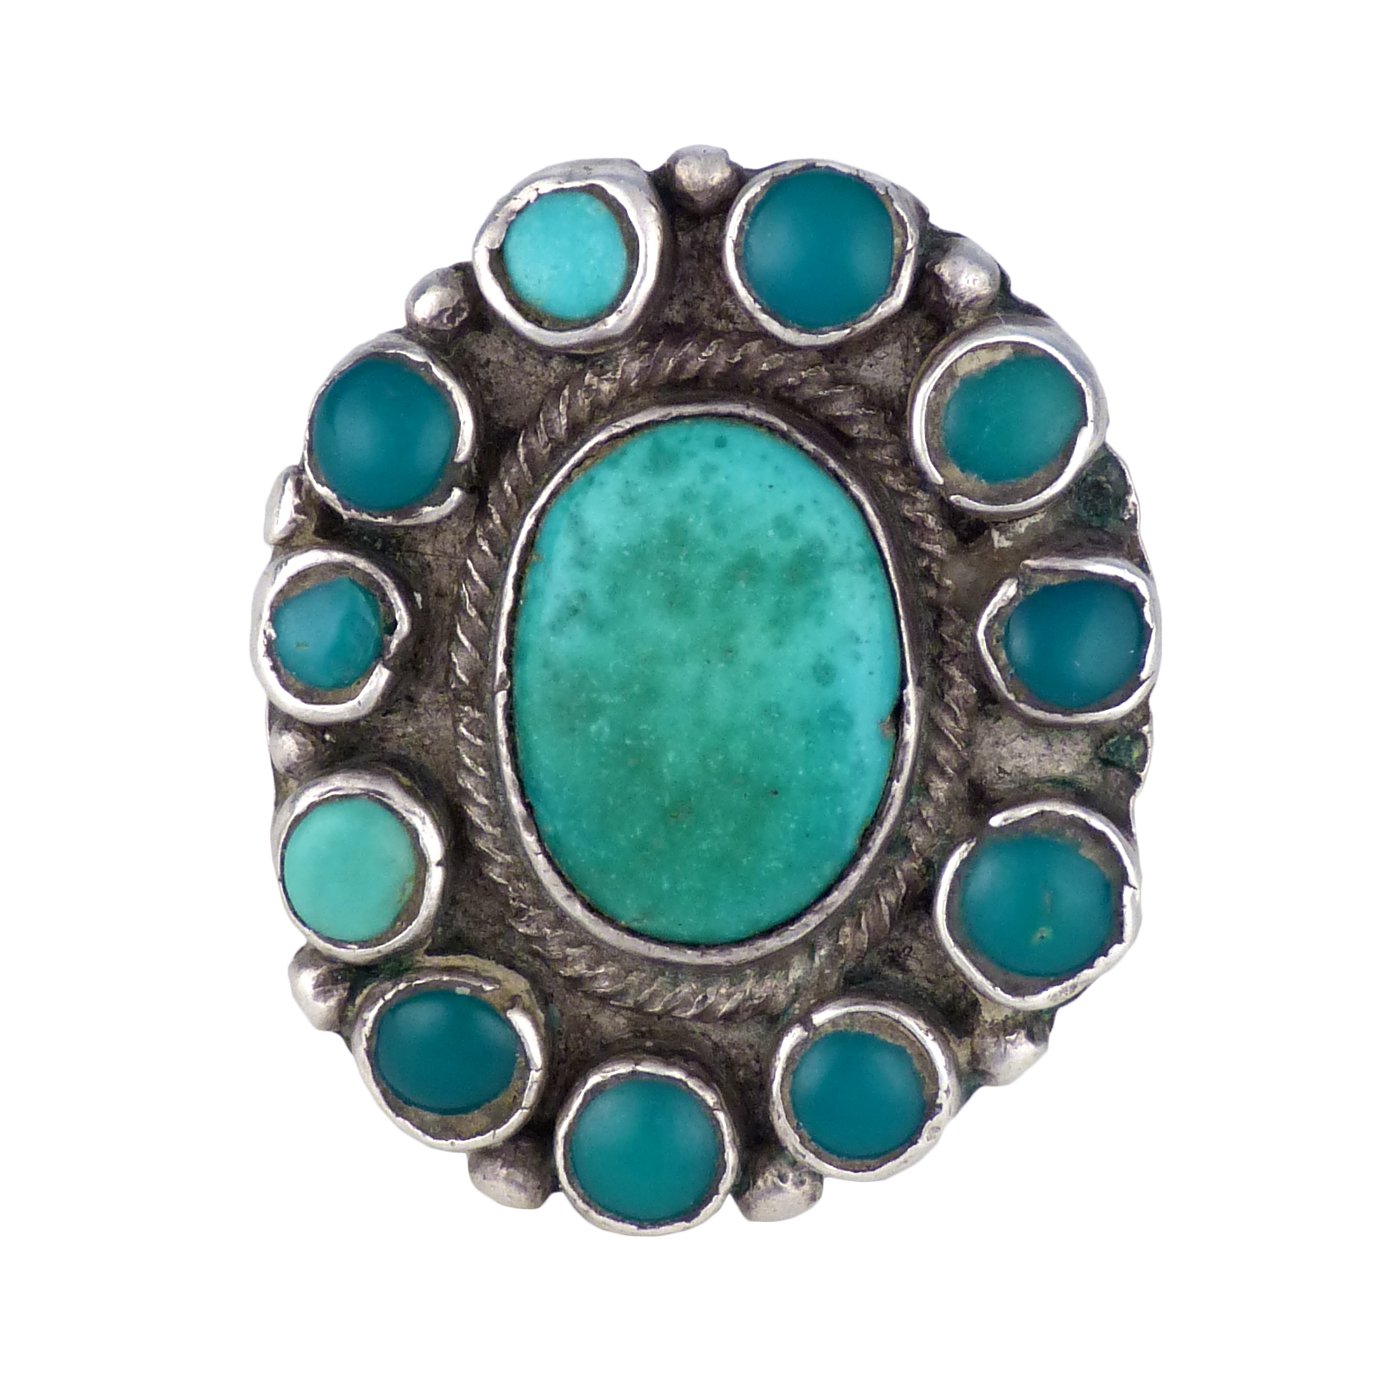 Navajo Silver and Turquoise Cluster Ring, c.1940 | Shiprock Santa Fe